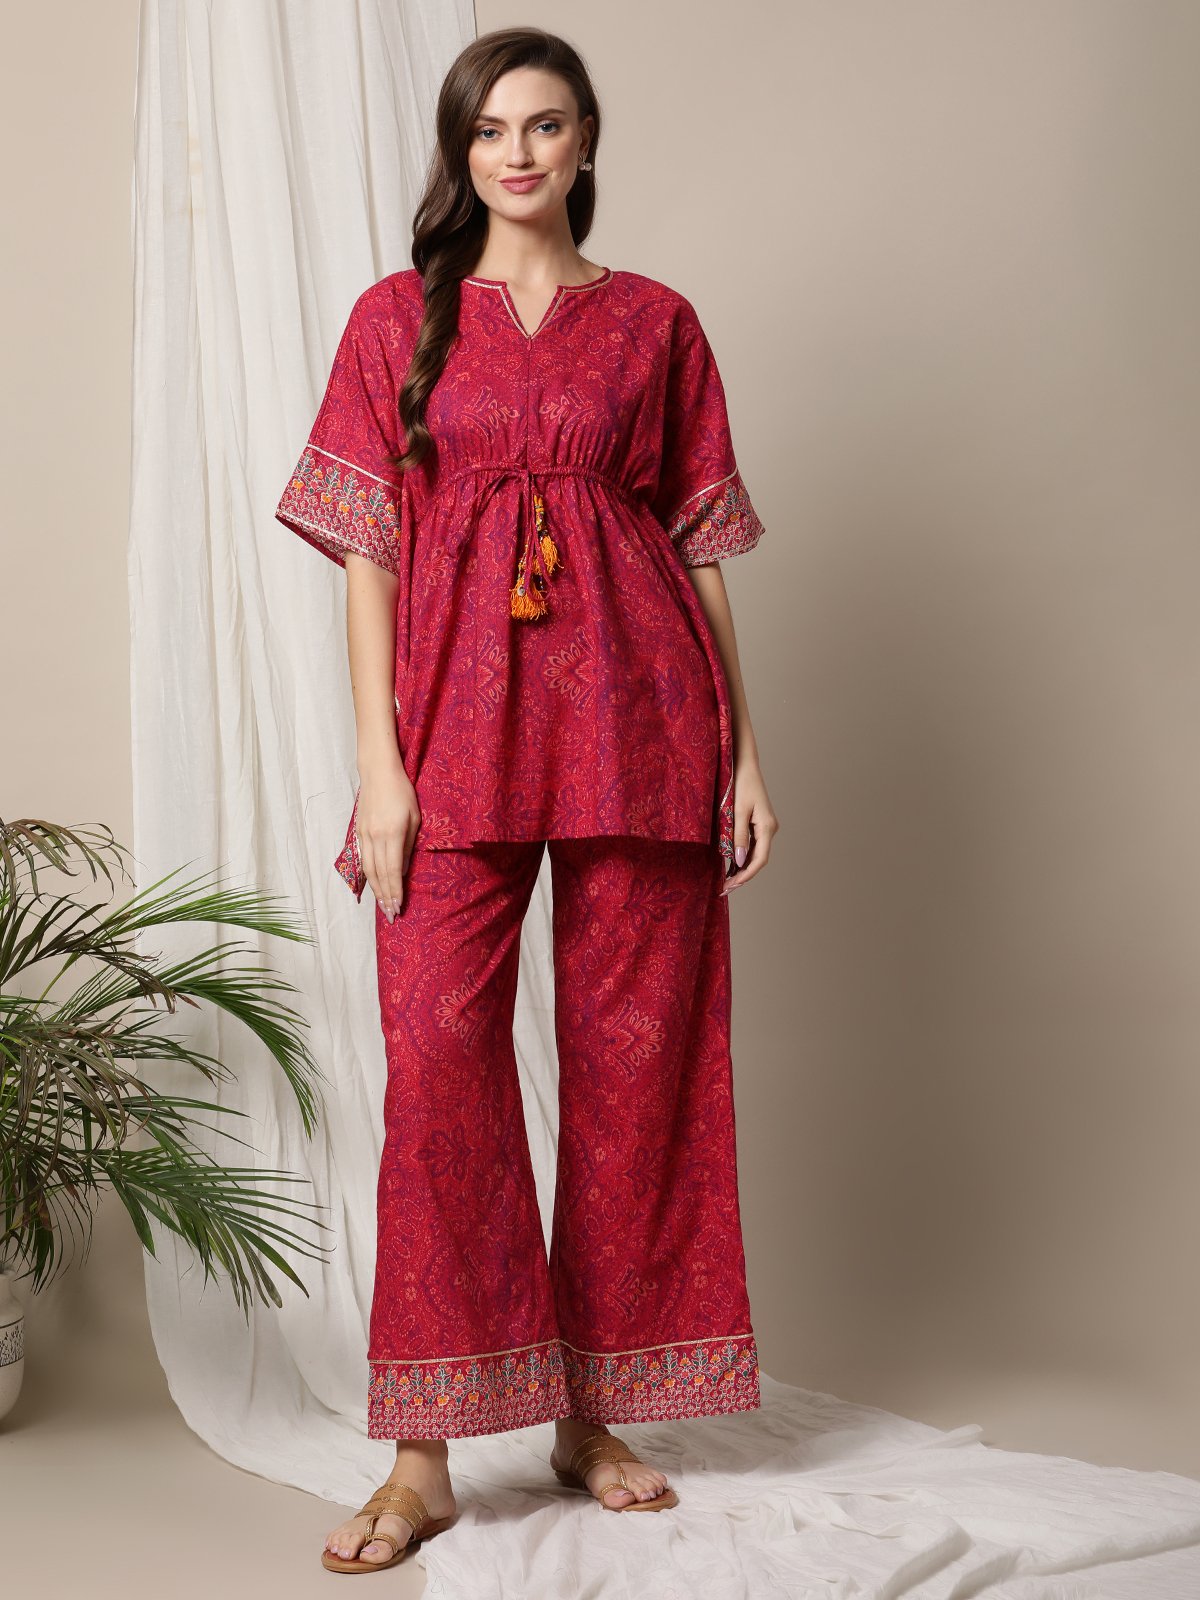 New) Plain Palazzo With Short Kurti For Eid Function 2022